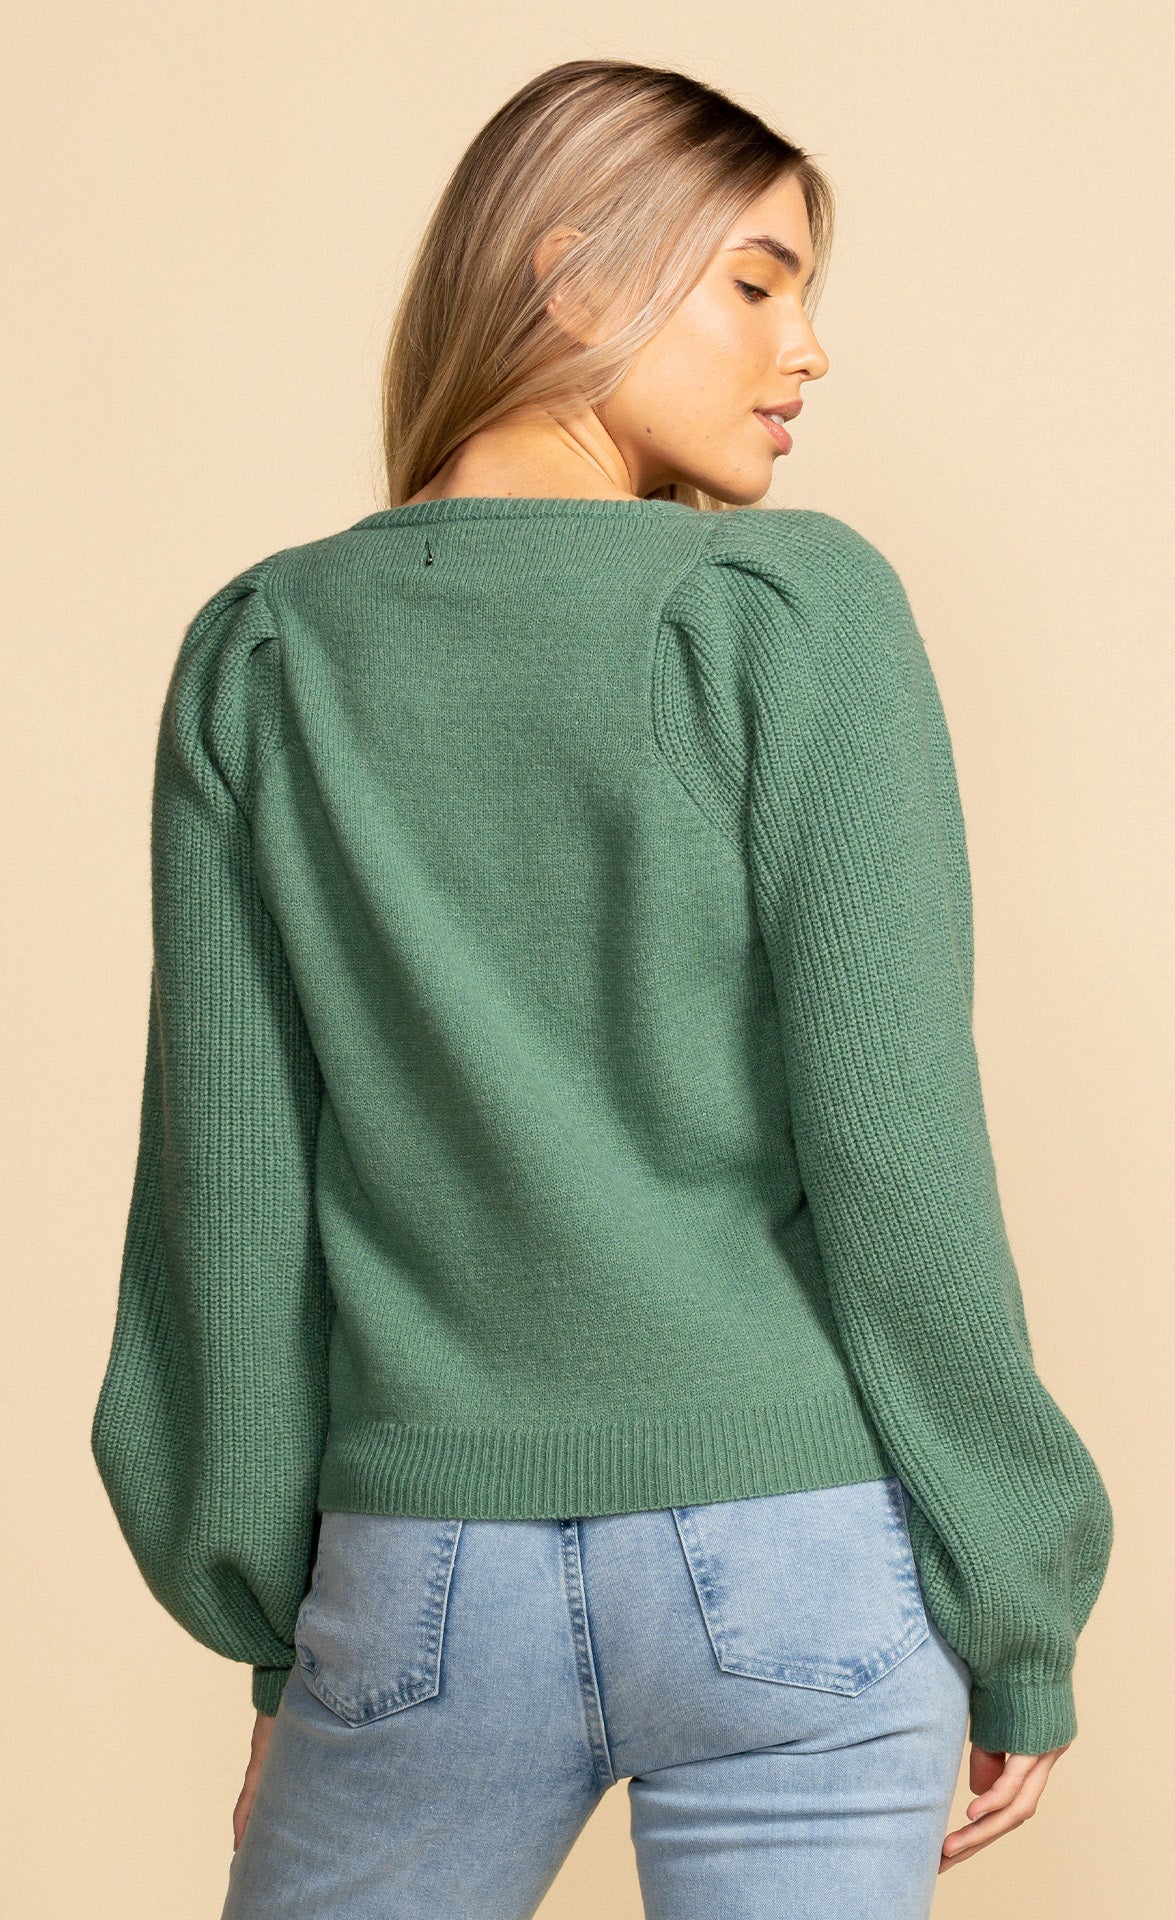 Kaylee Knit Sweater Green - Pink Martini Collection